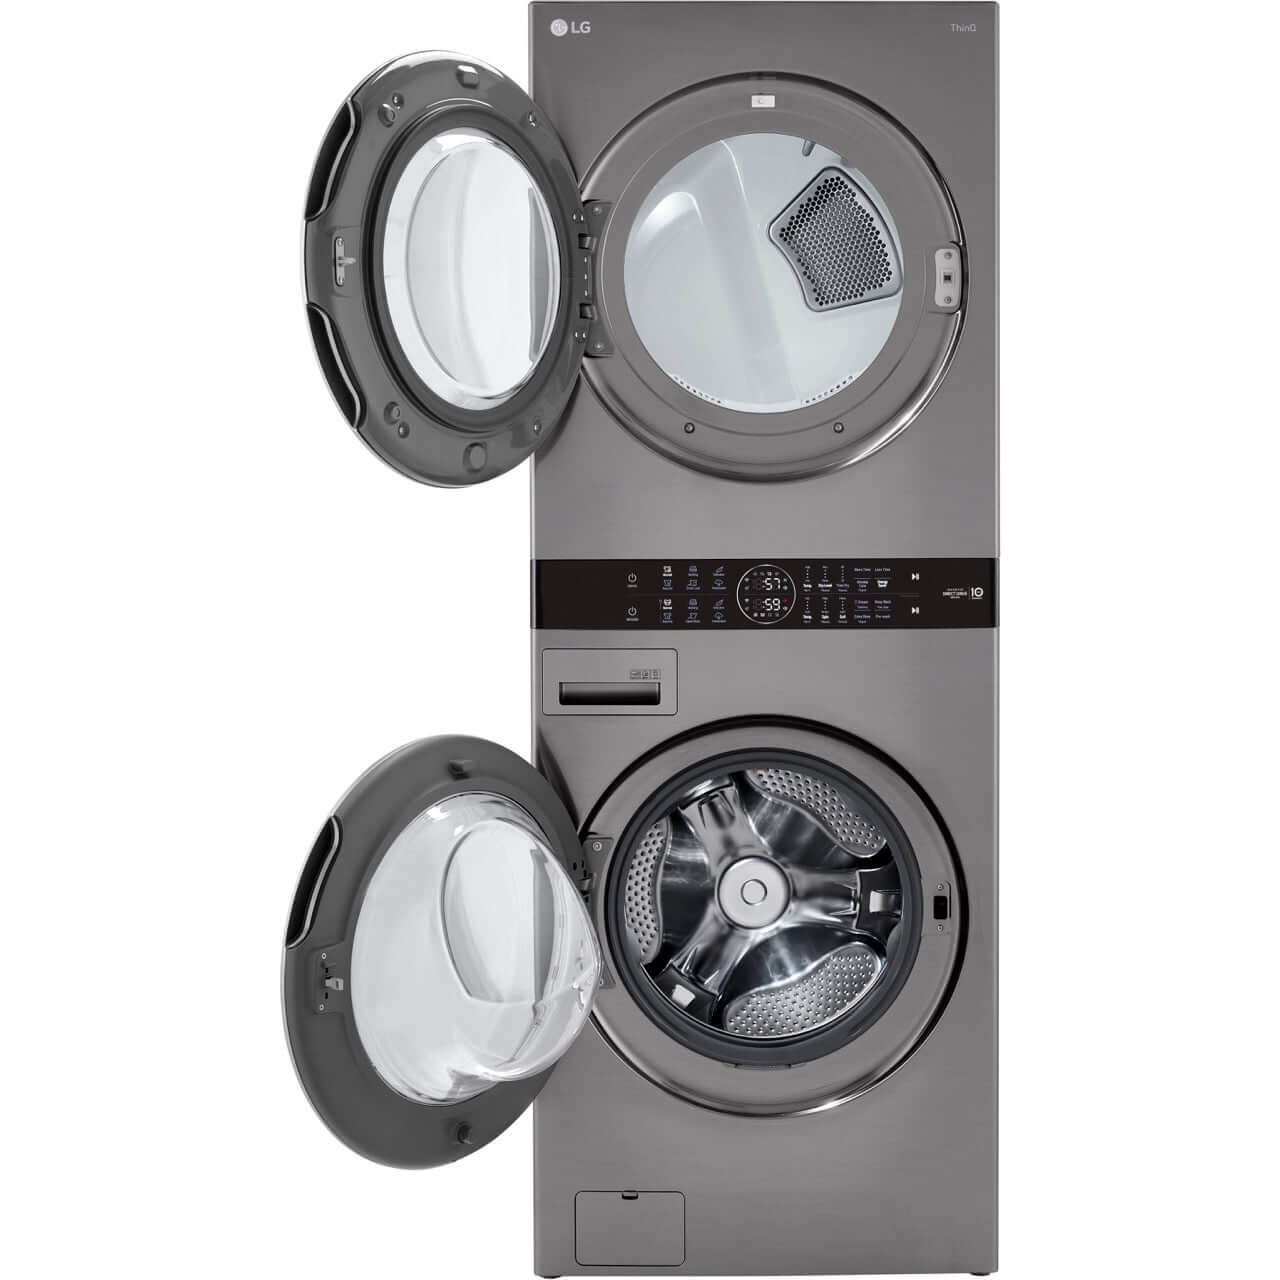 LG Single Unit Front Load LG WashTower with Center Control 4.5-cu. ft. Washer and 7.4-cu. ft. Gas Dryer in Graphite Steel (WKG101HVA)